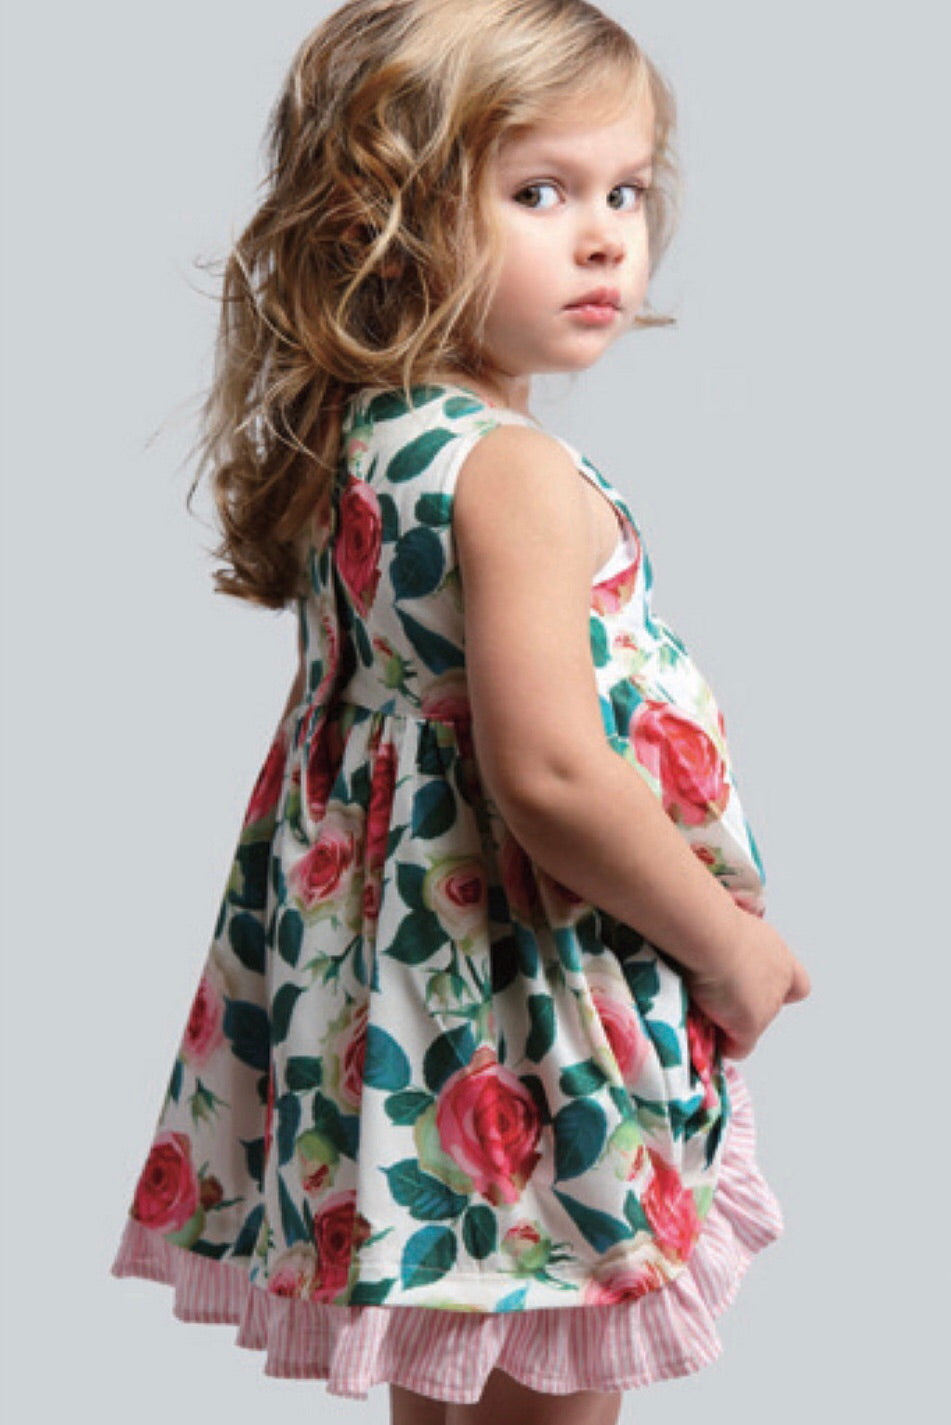 Pan Con Chocolate Baby Girls Pink & Green Floral Dress & Bloomers